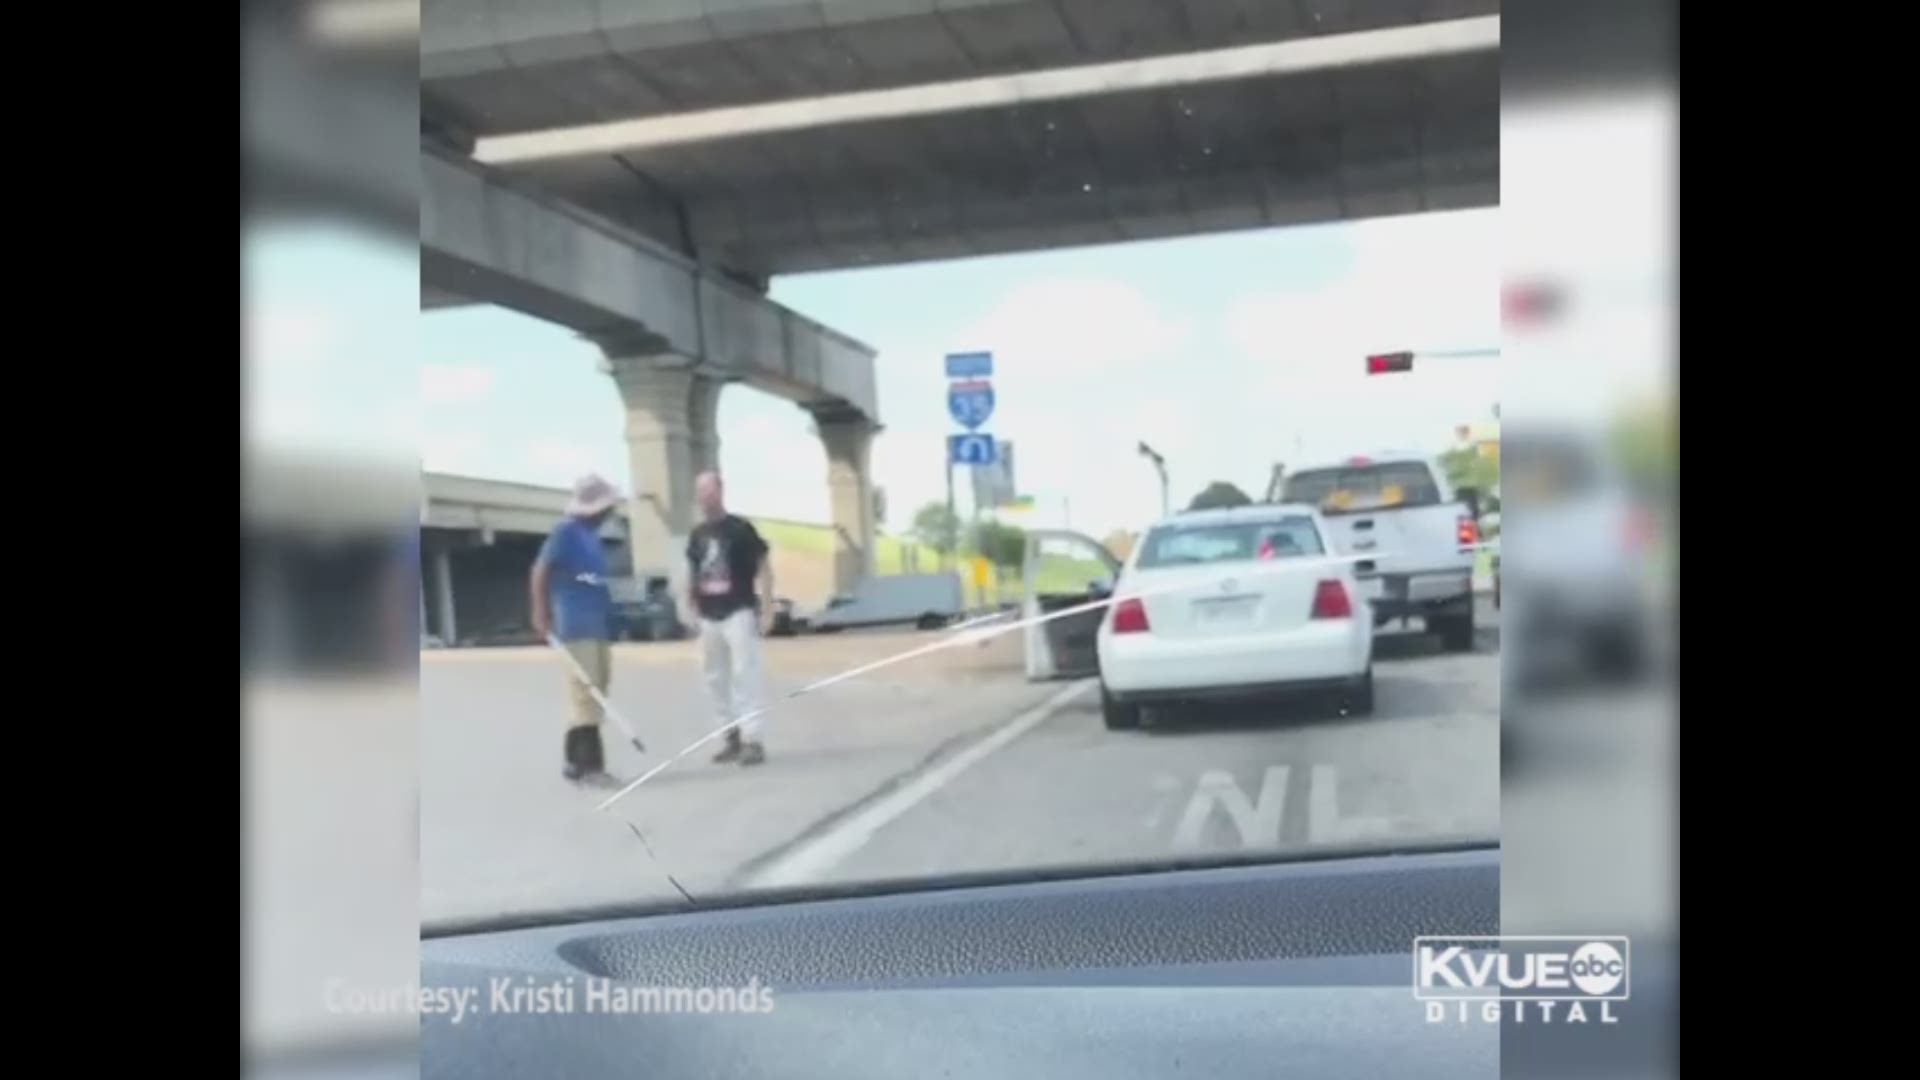 A shocking video appears to show a man getting out of his car and pushing another man in front of a vehicle at a North Austin intersection.